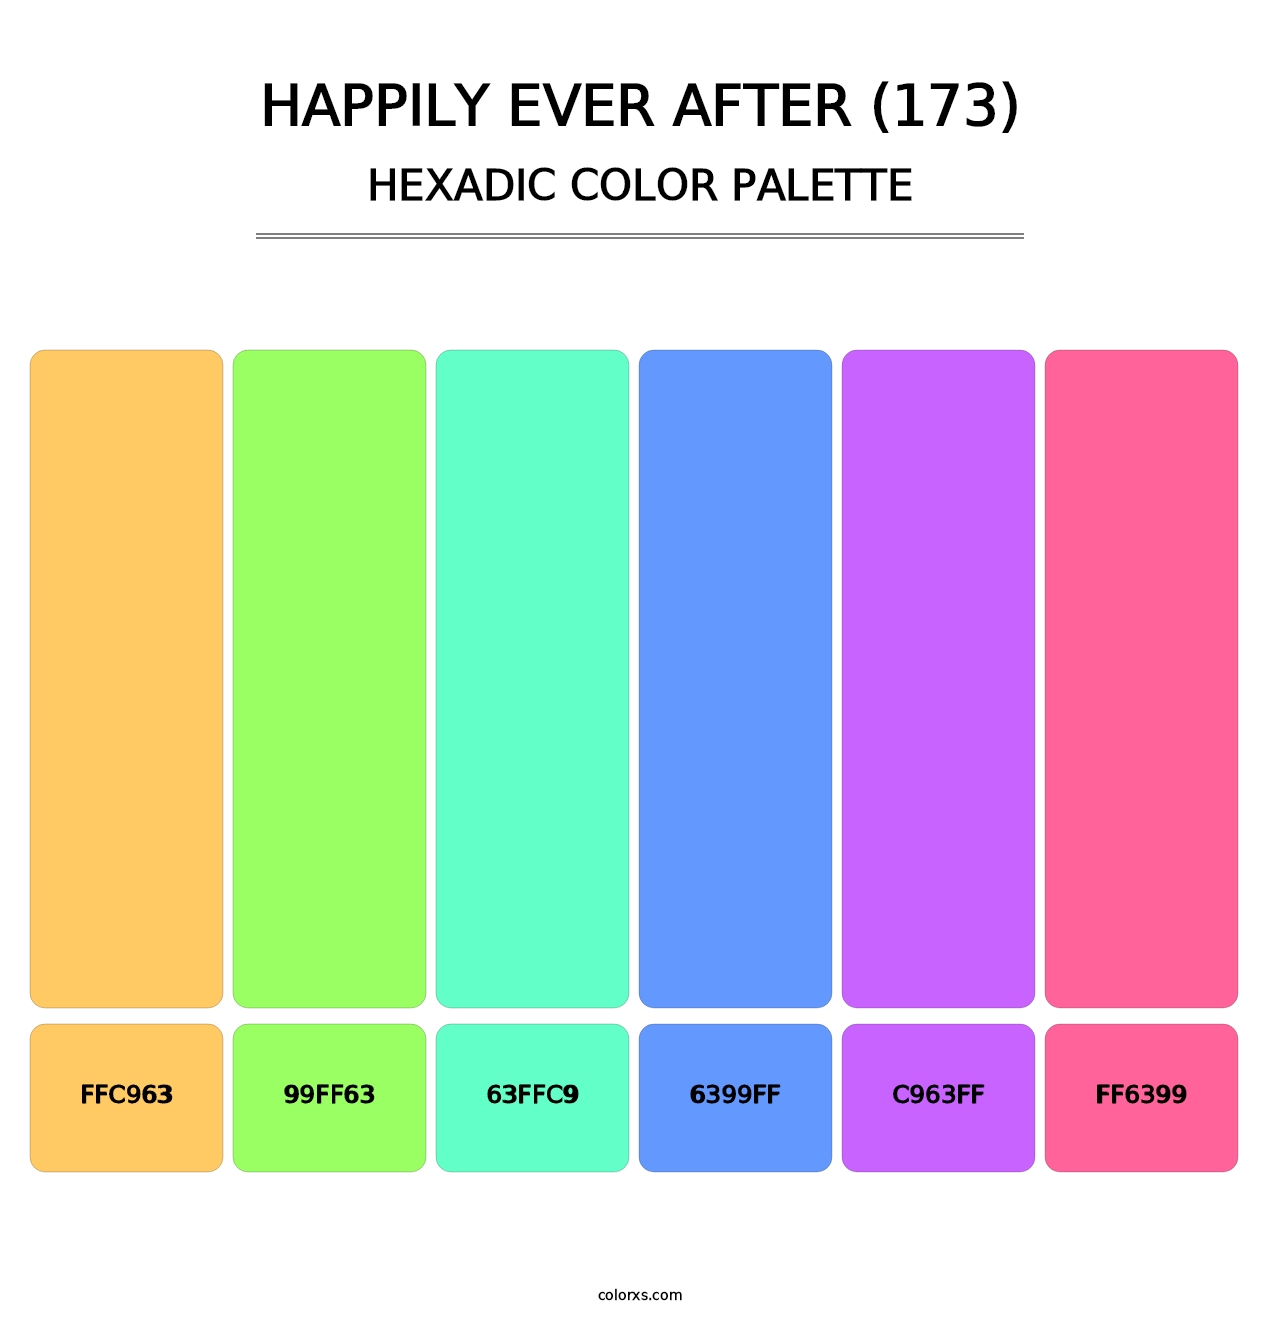 Happily Ever After (173) - Hexadic Color Palette